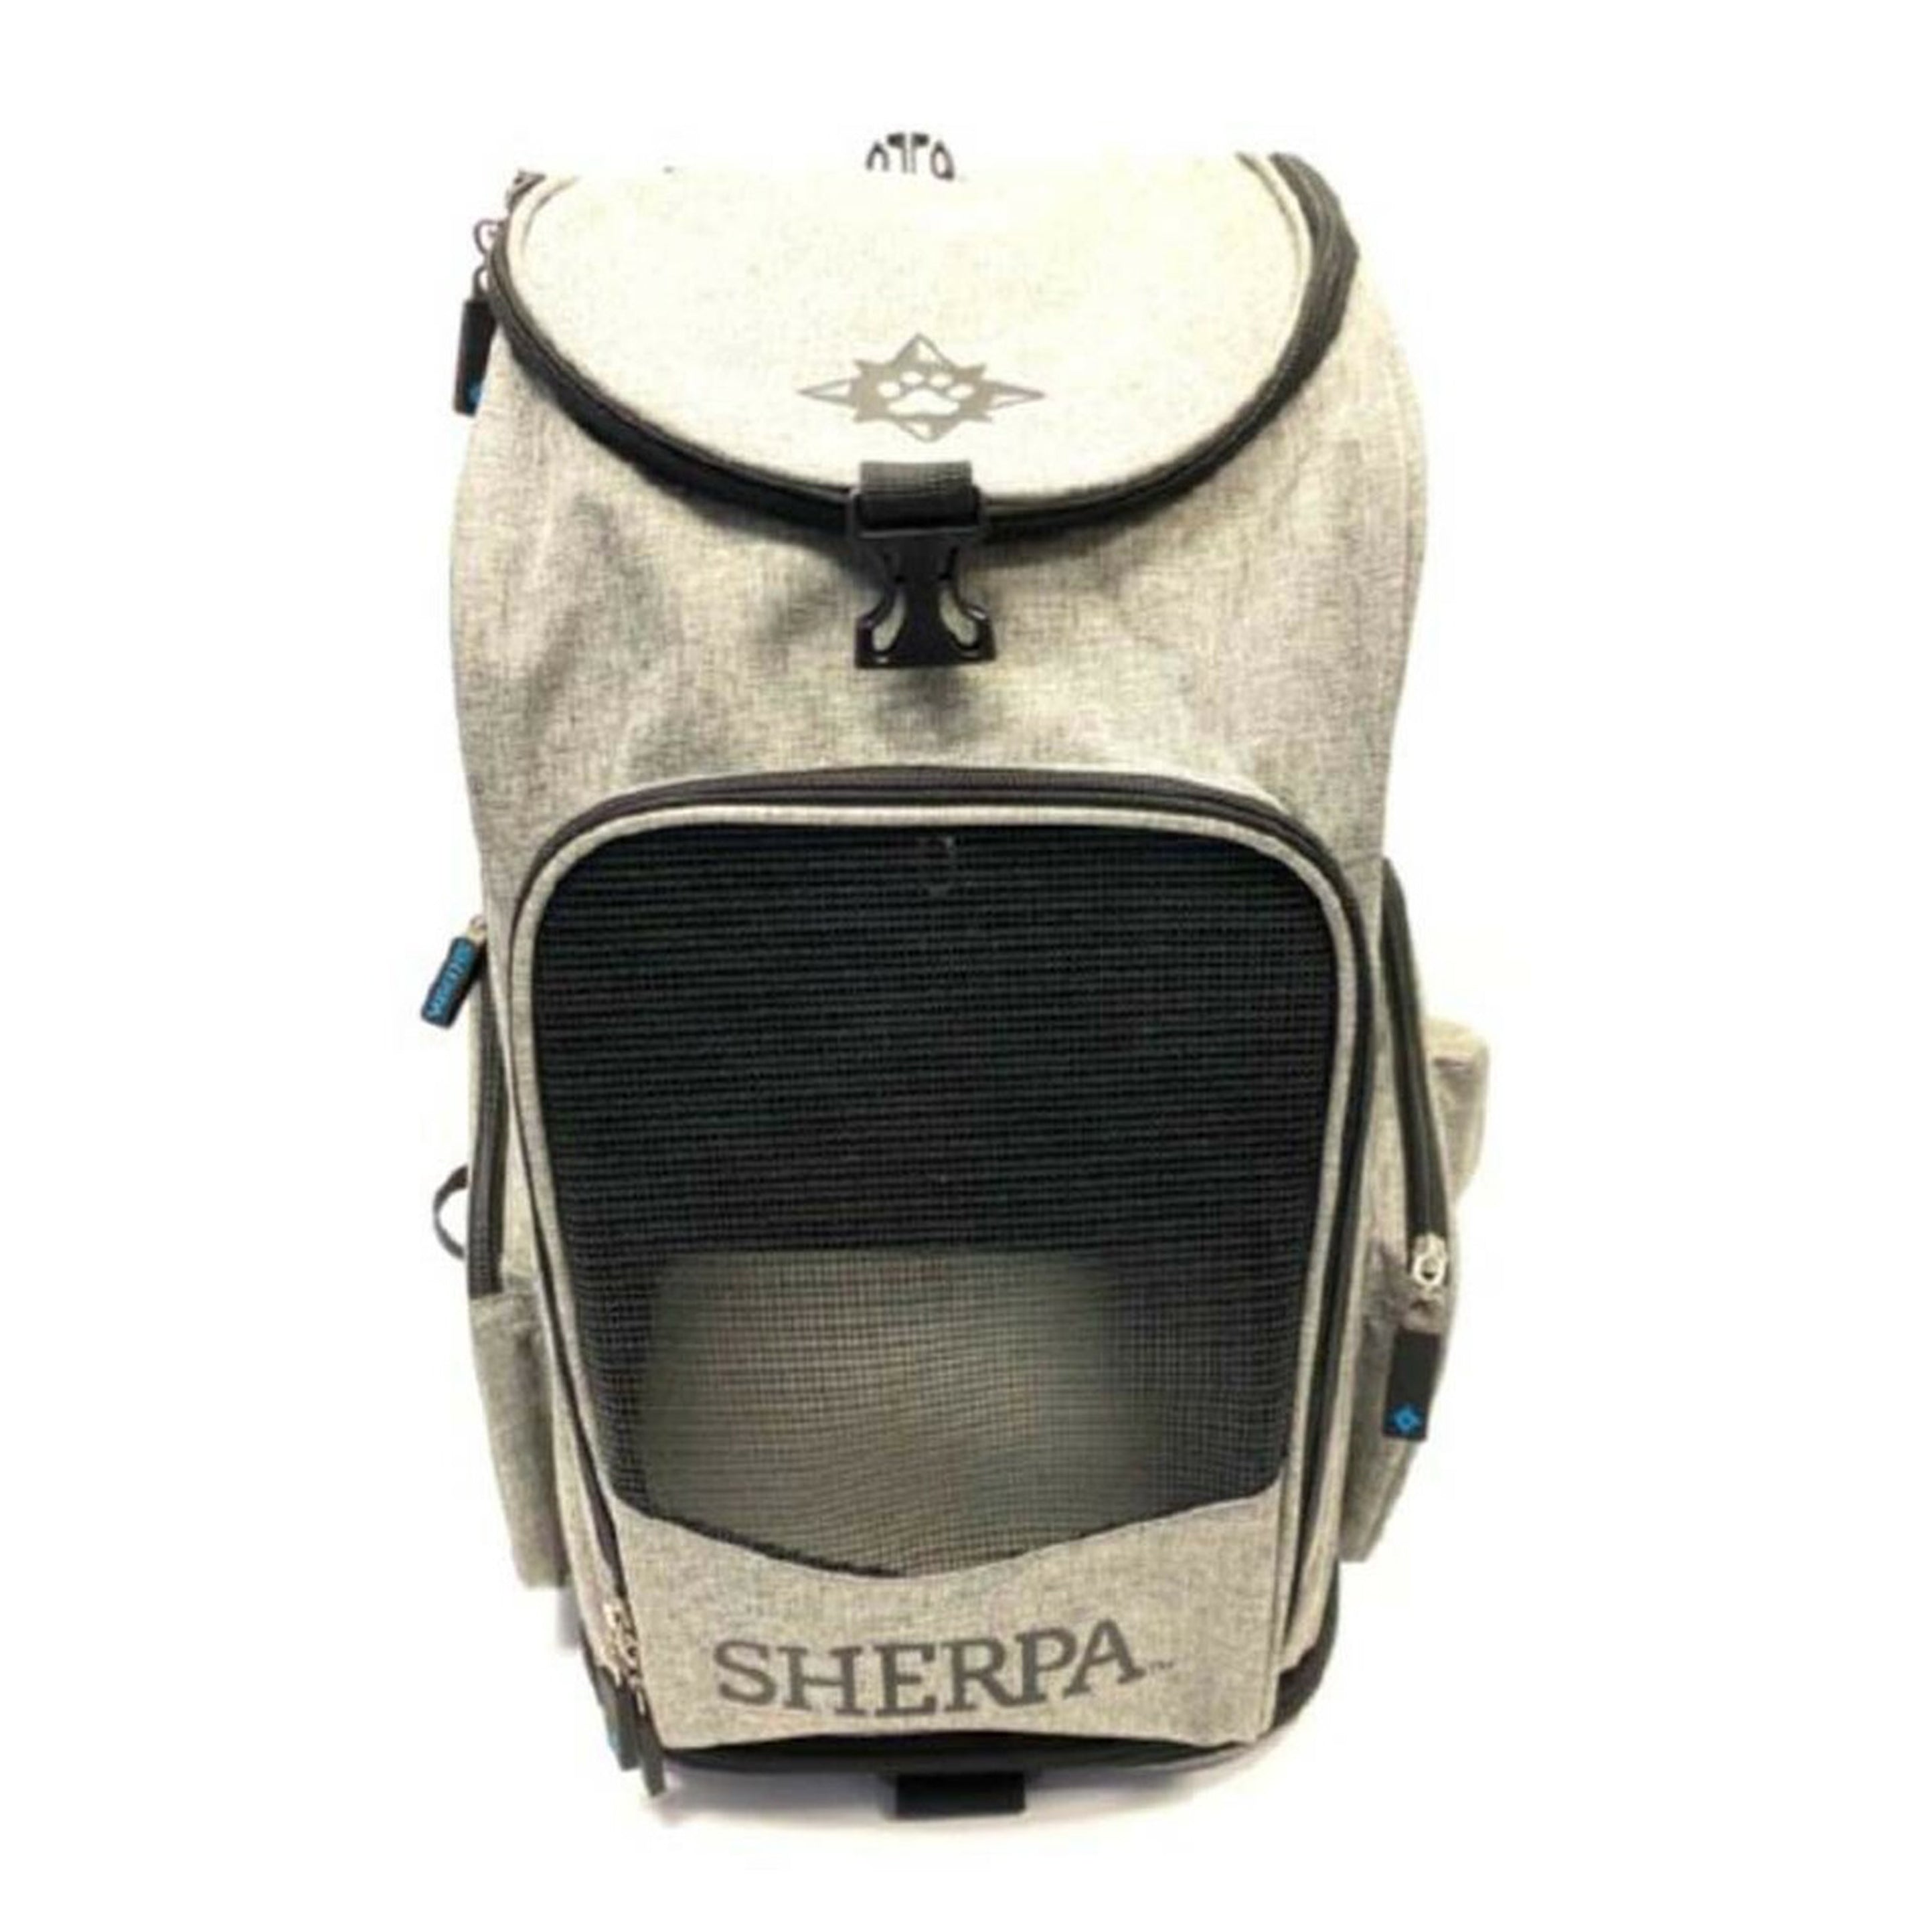 Sherpa's Pet Trading Company Travel Backpack Pet Carrier 18x13x10.5 Inches